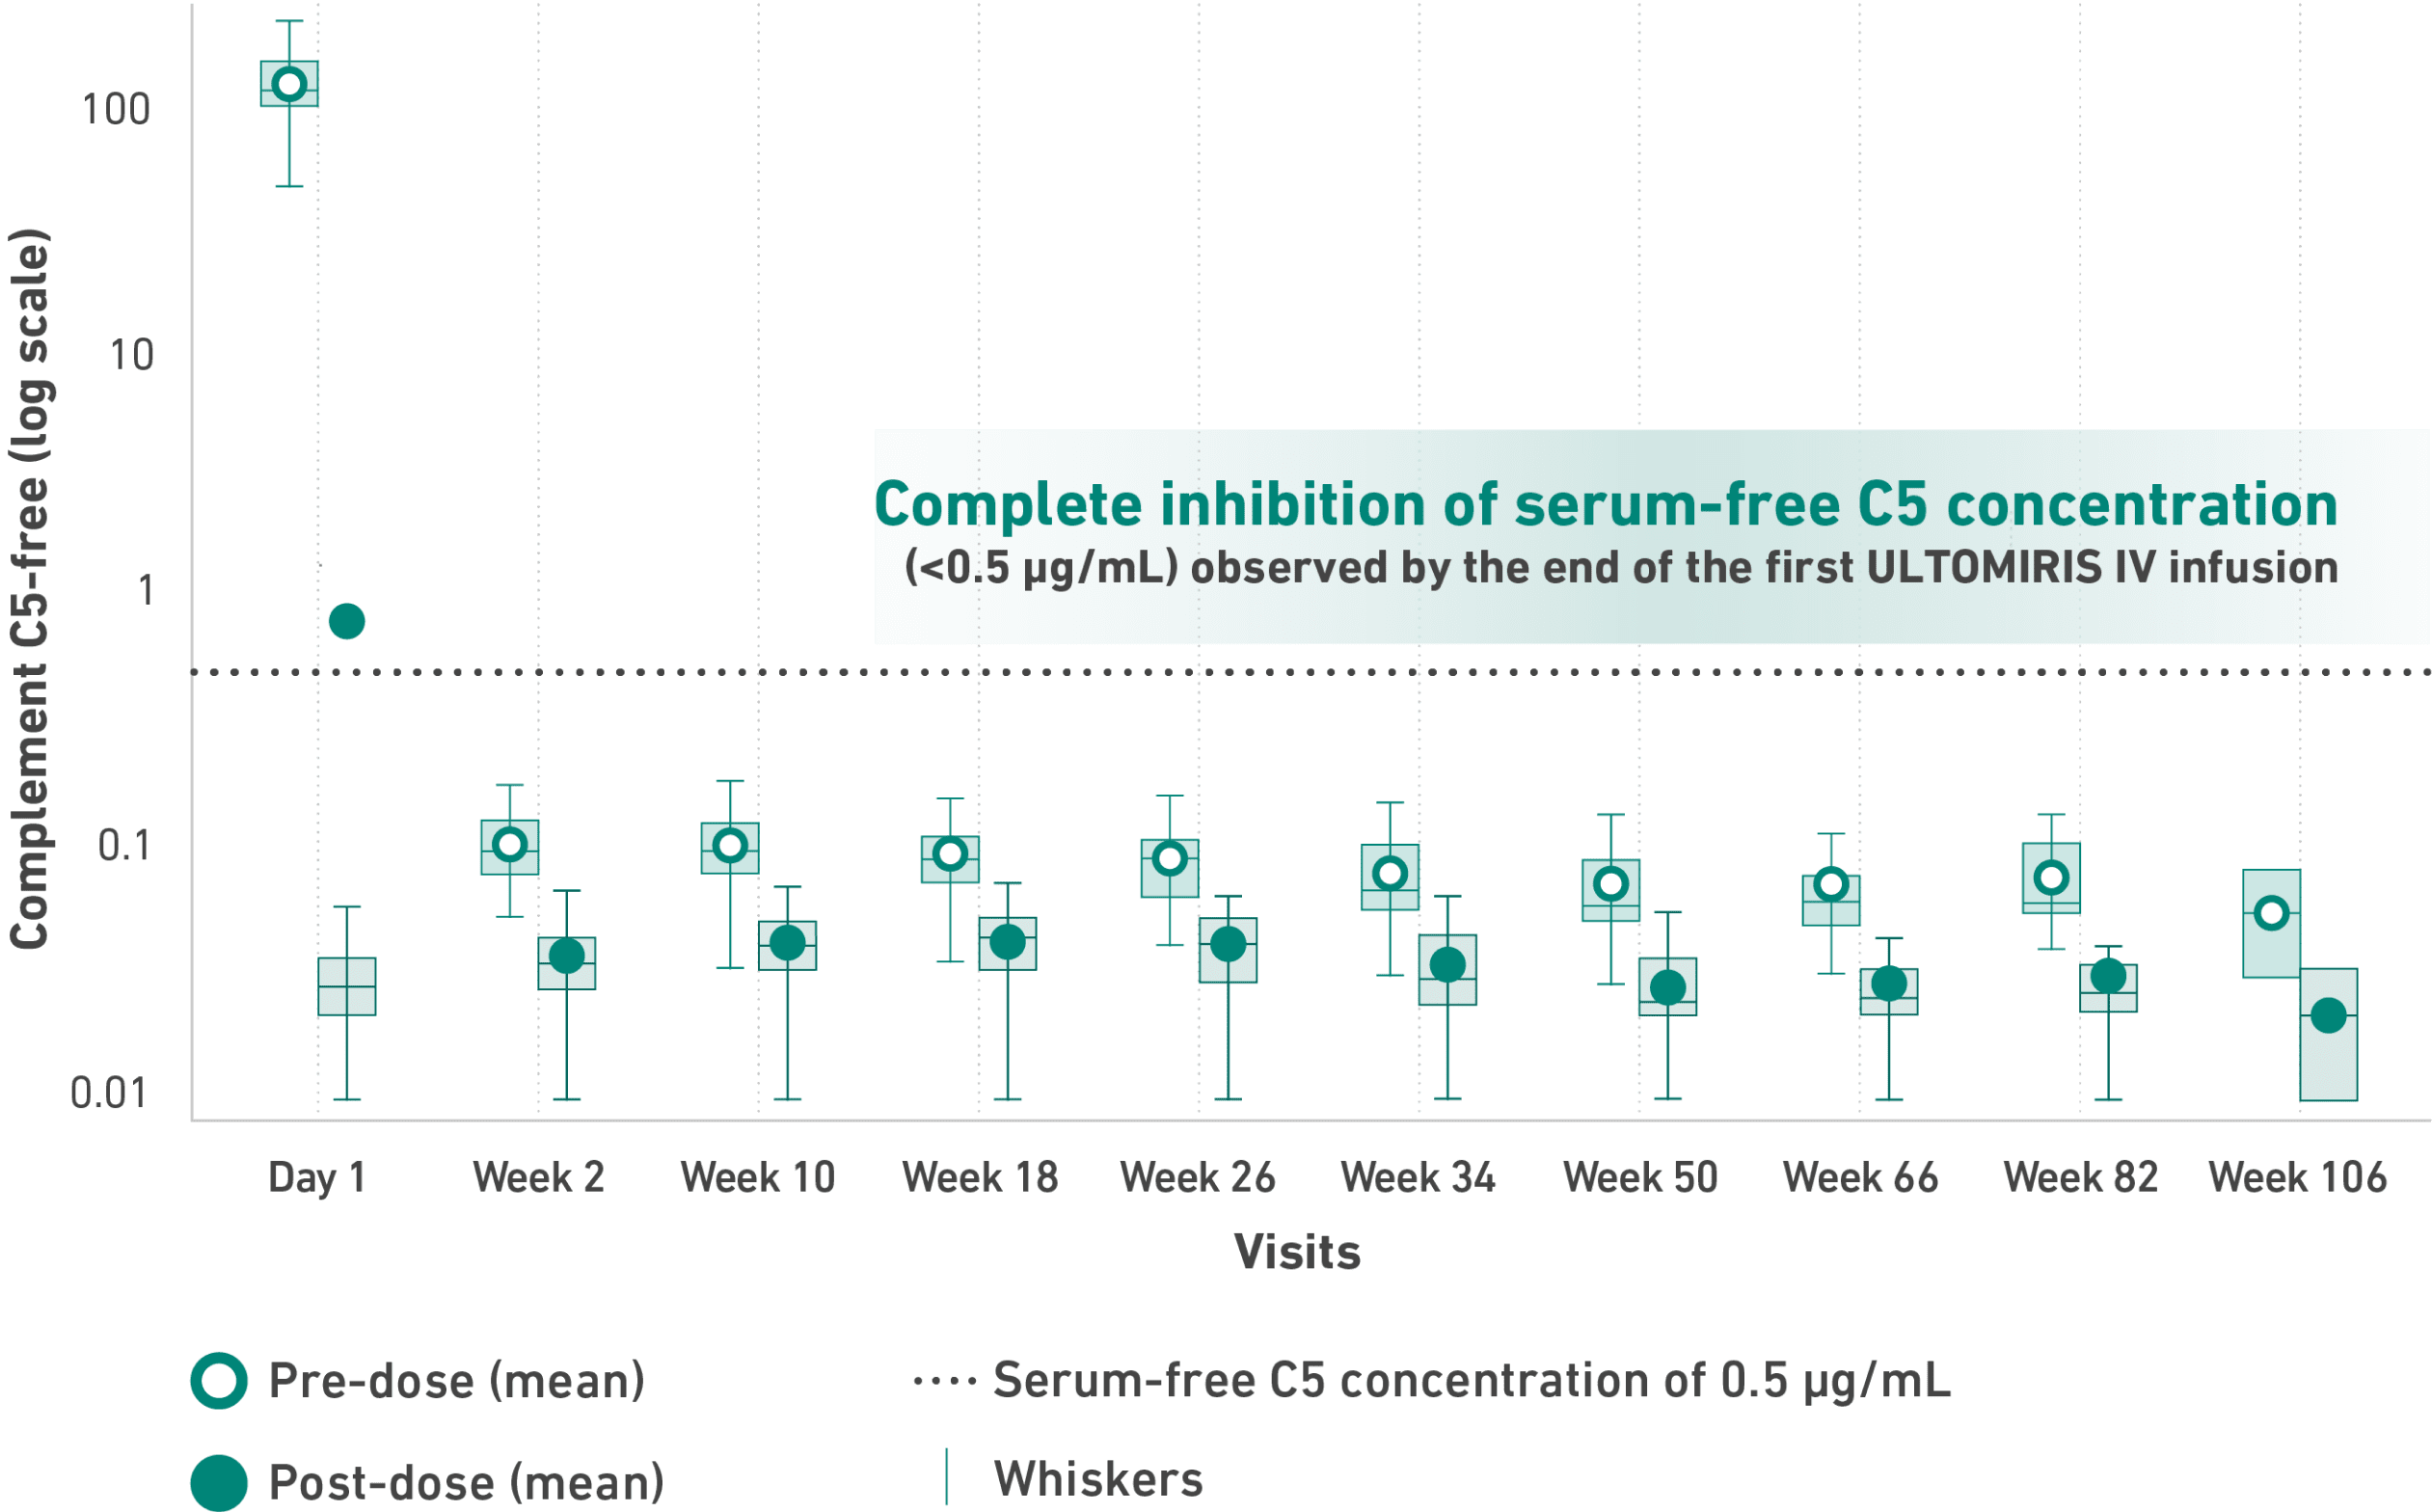 Complete inhibition of serum-free C5 concentration observed by the end of the first ULTOMIRIS IV infusion